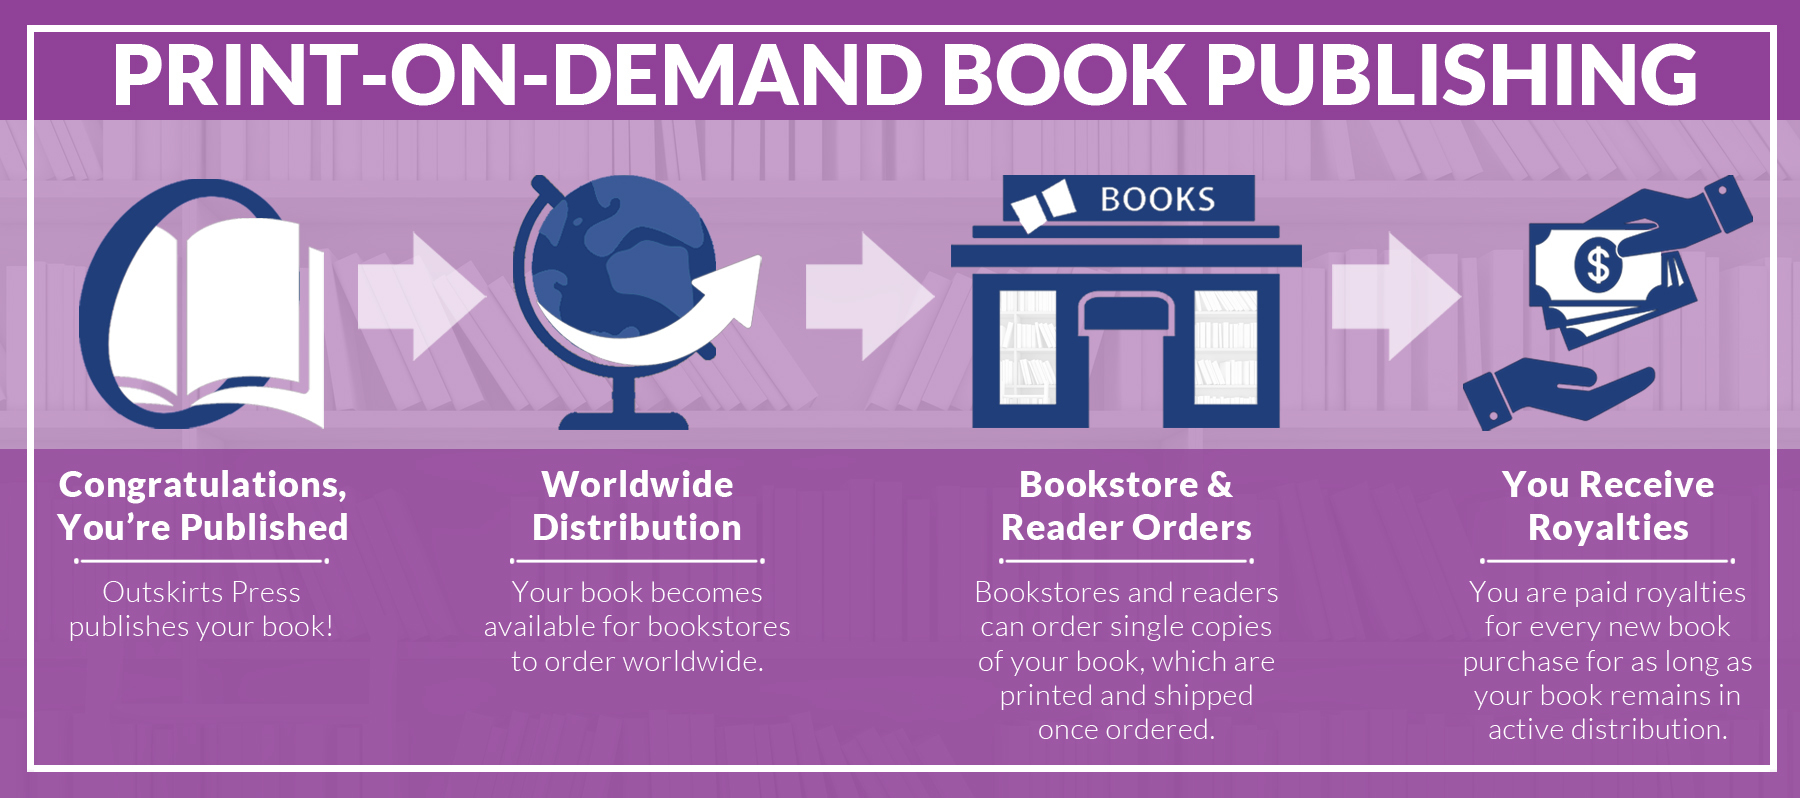 Print-on-demand book order fulfillment for self-published books.